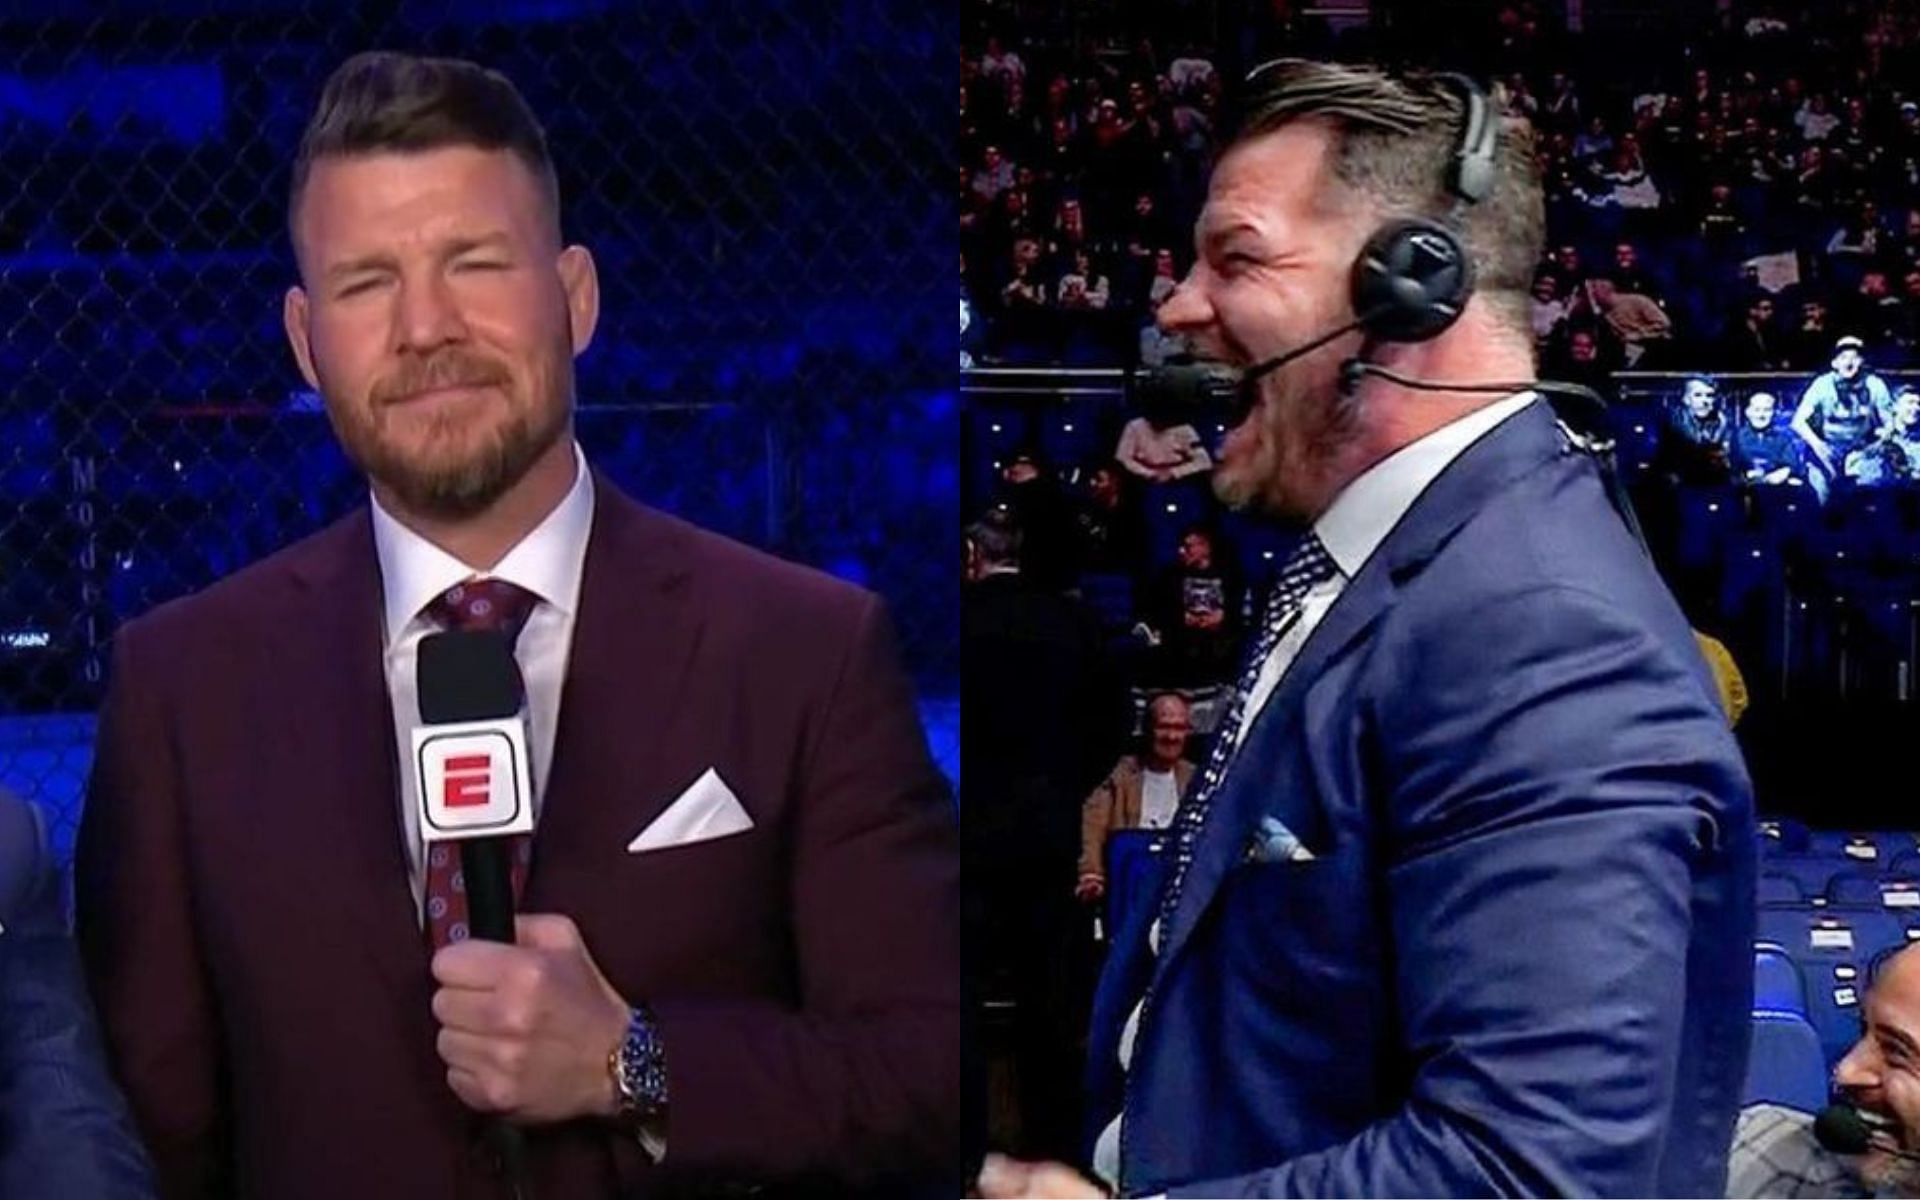 Image courtesy @mikebisping on Instagram